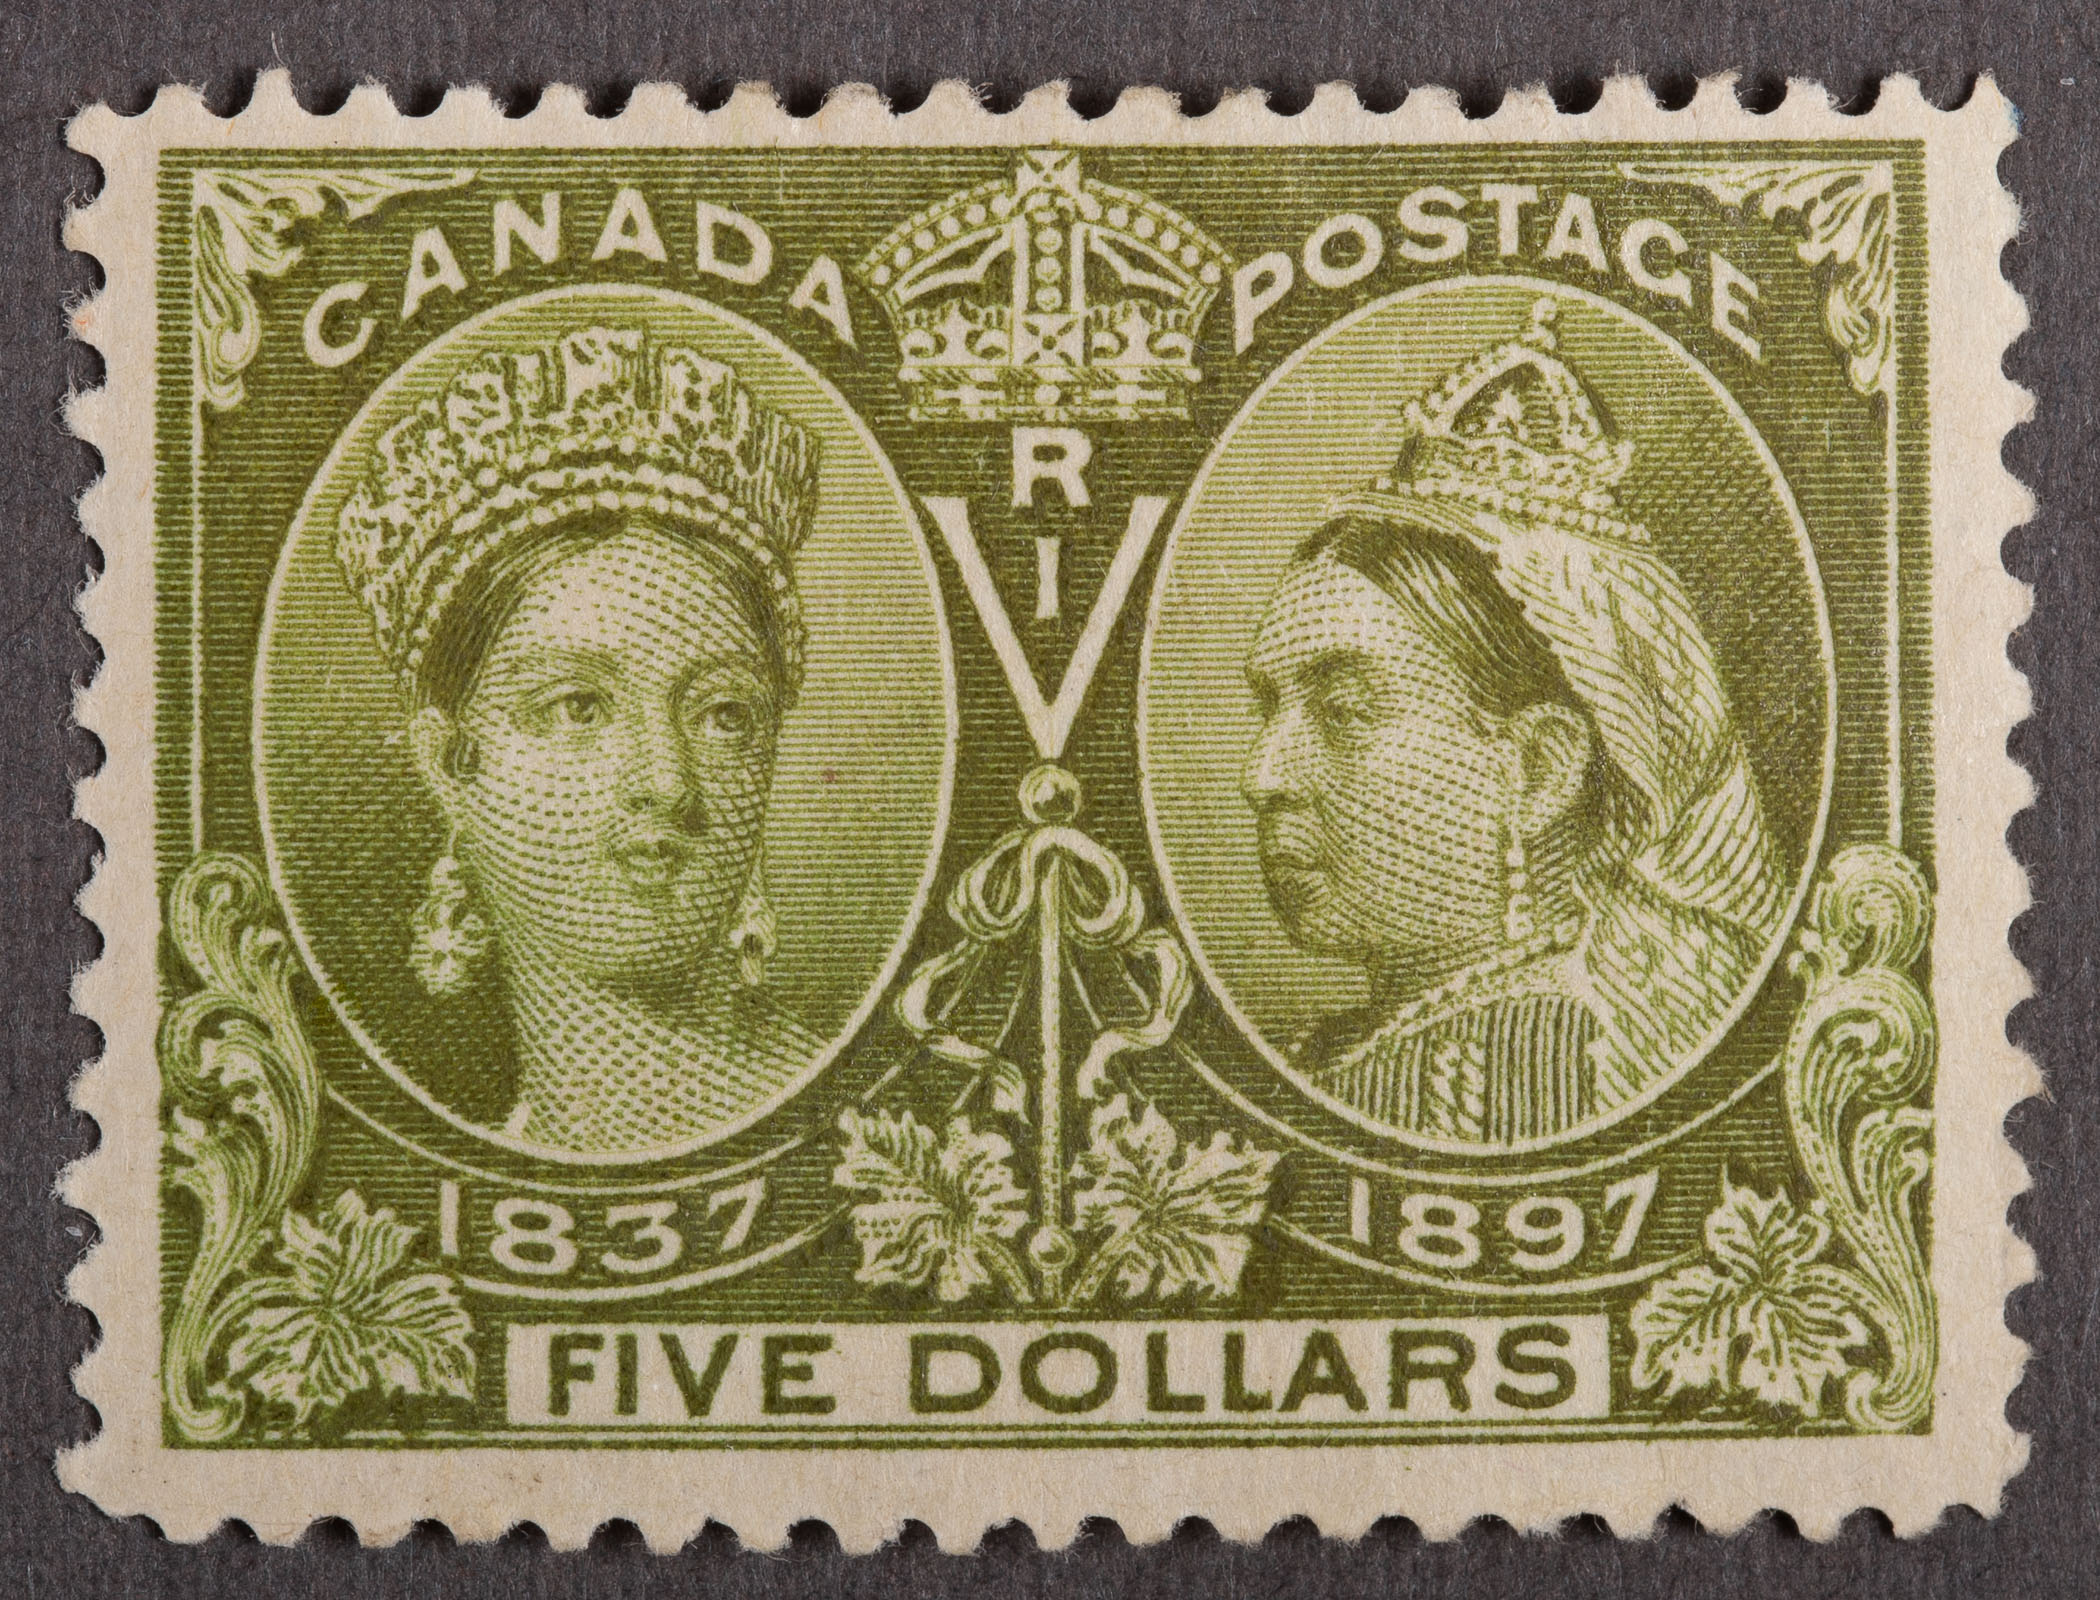 CANADA 5 POSTAGE STAMP 1897 338a0b